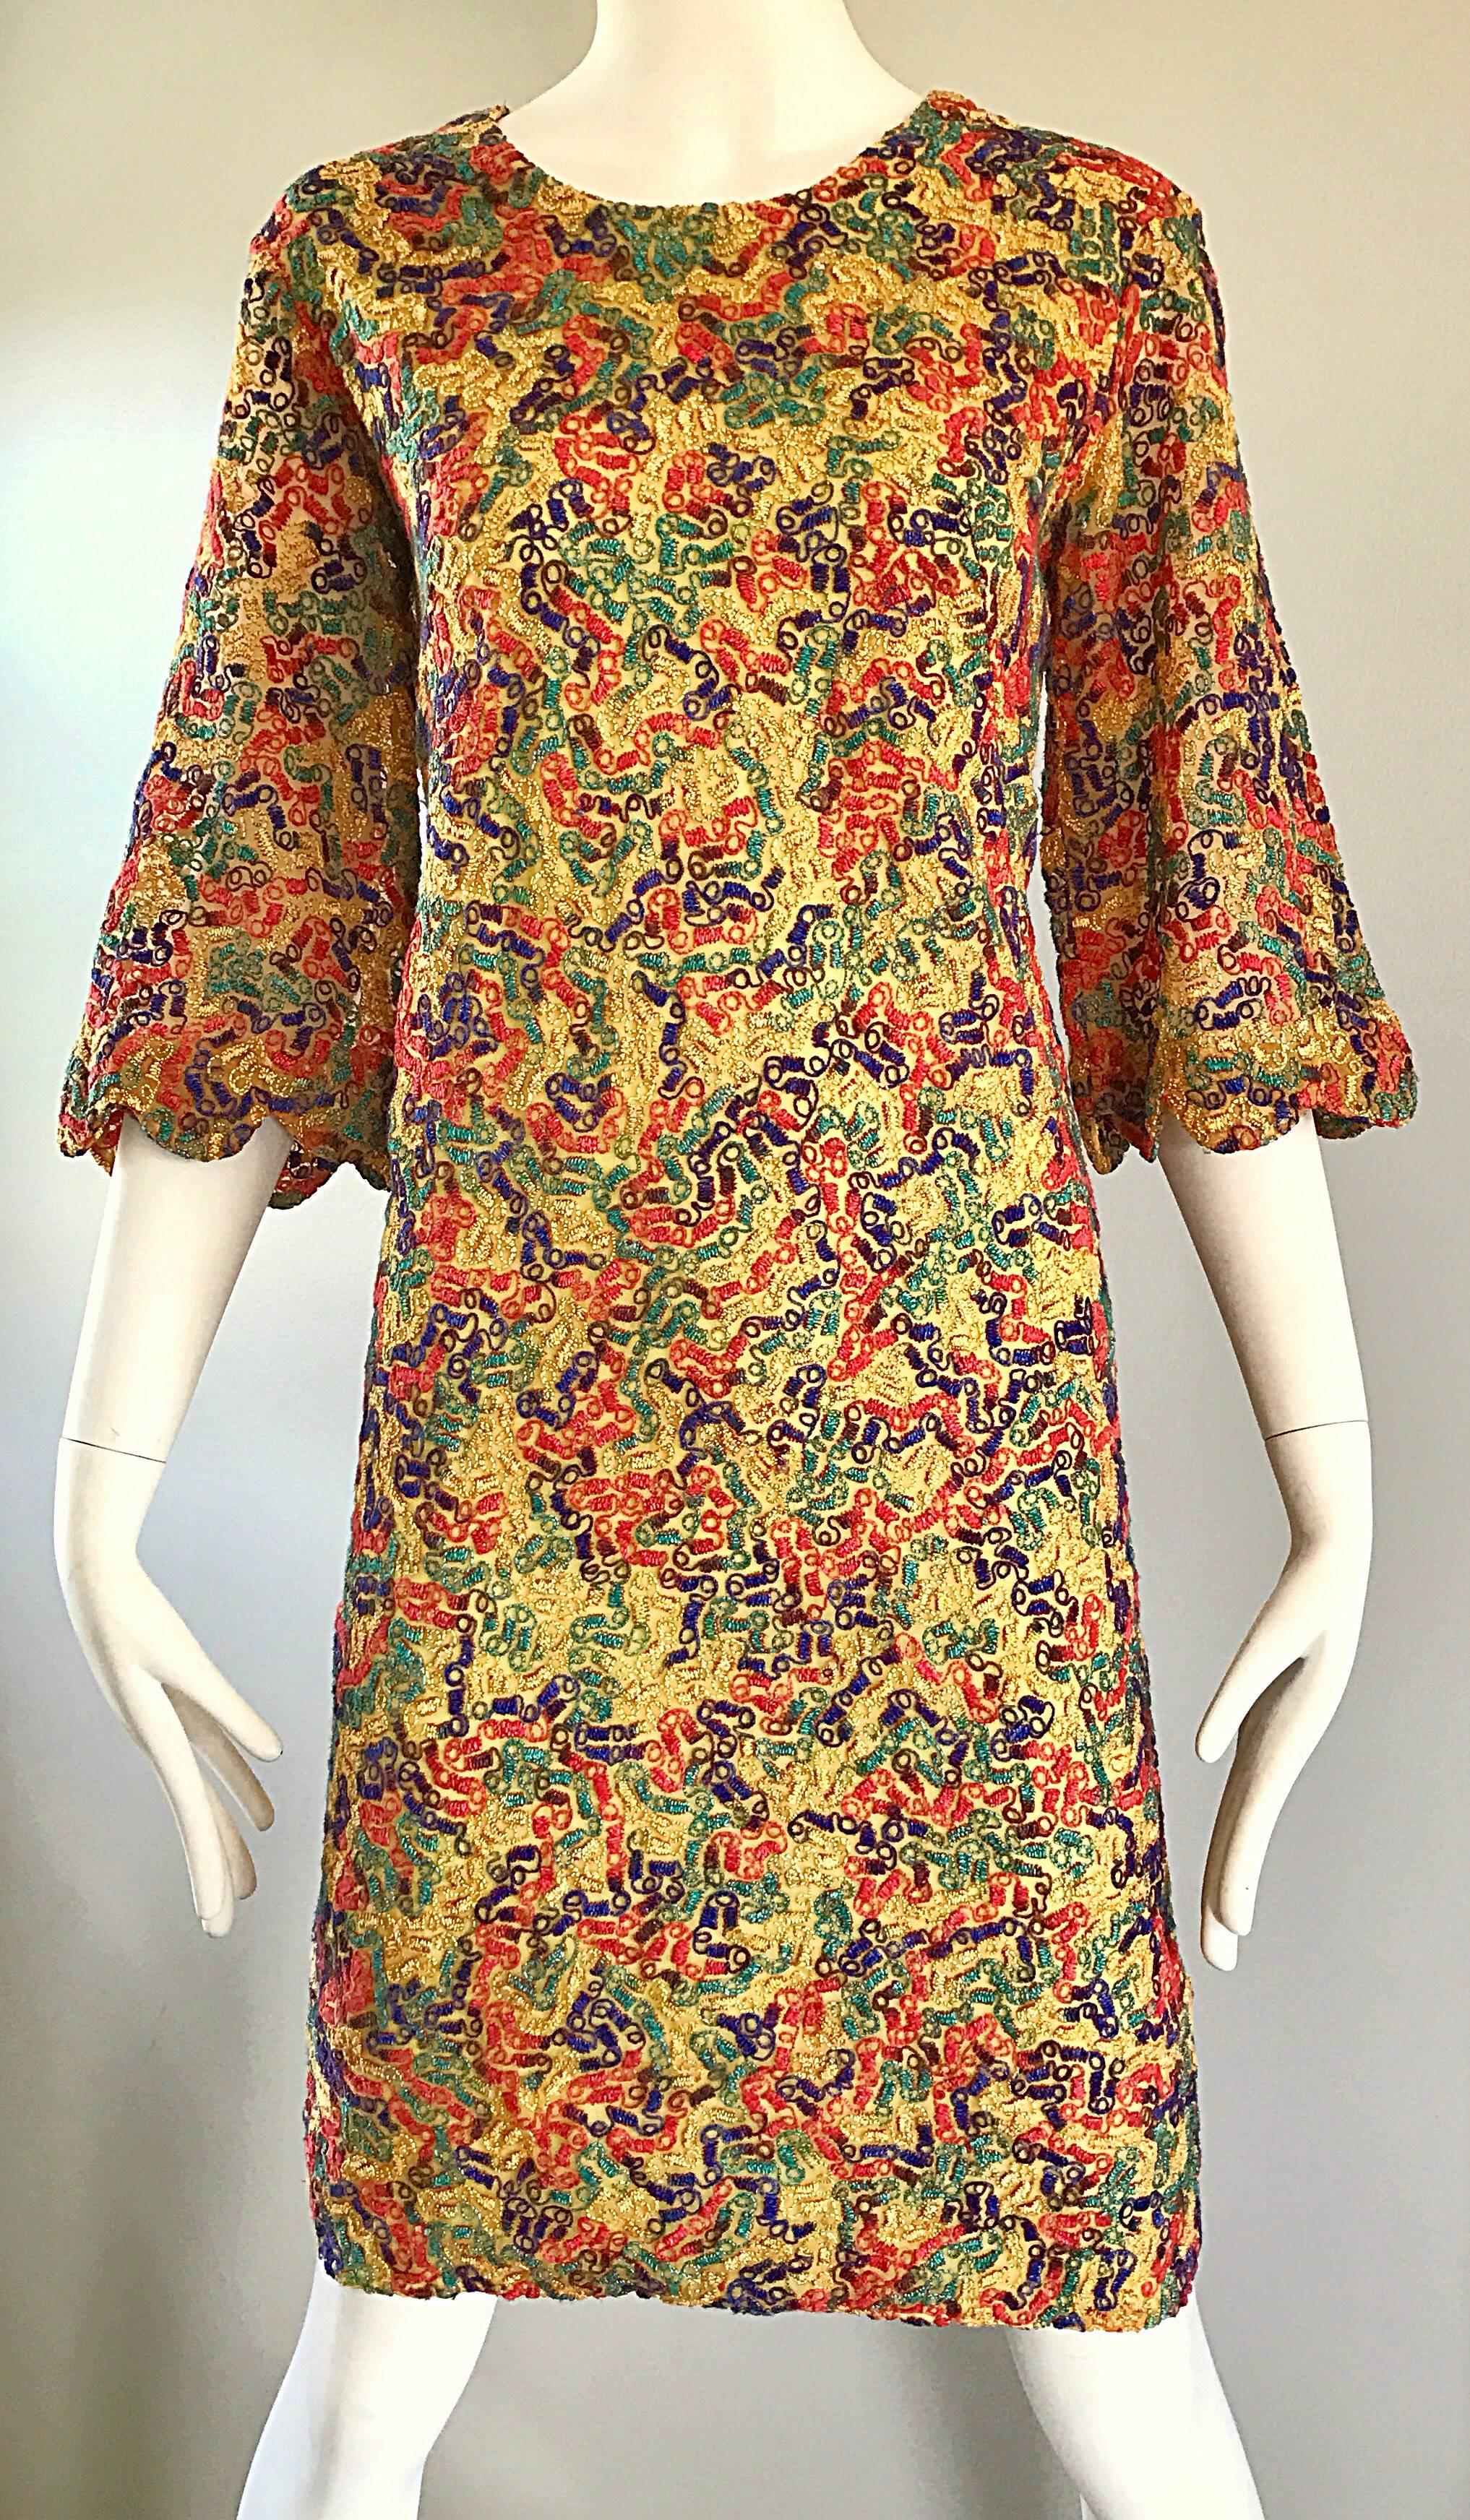 Brown Amazing 1960s Colorful 60s Vintage Mod Shift Dress w/ Scalloped Bell Sleeves For Sale